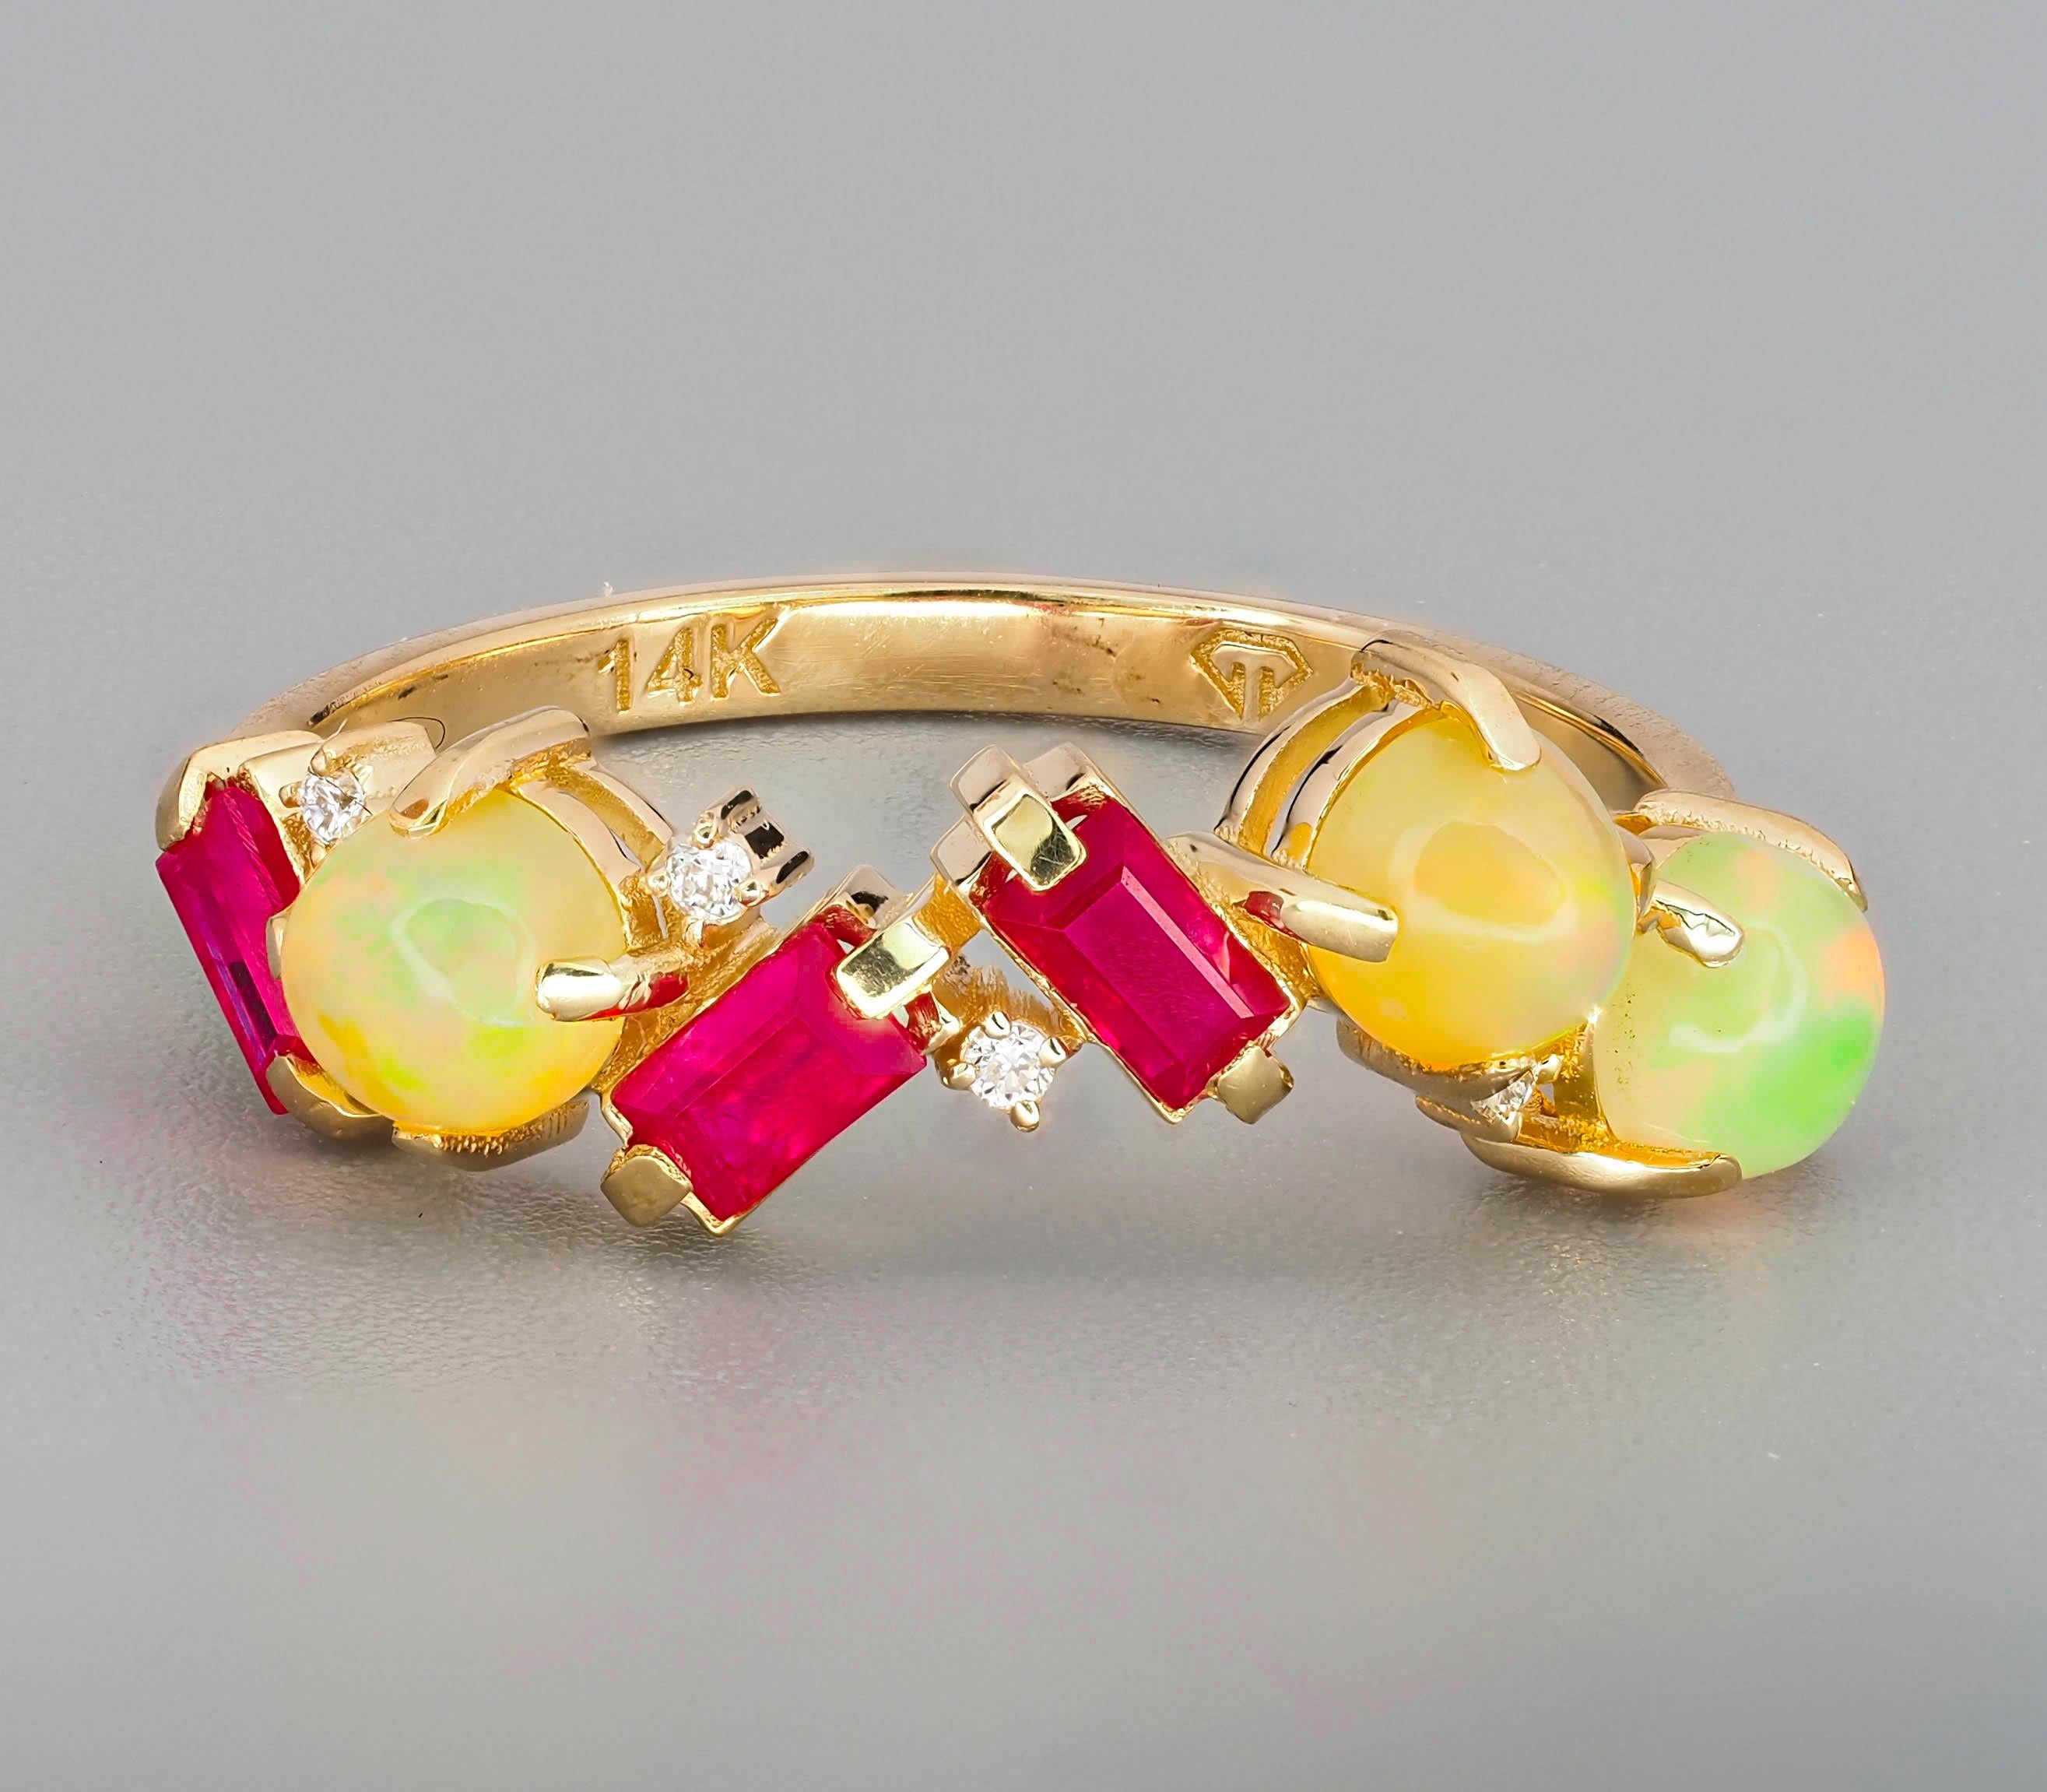 For Sale:  14k Gold Ring with Rubies, Diamonds and Opals! 3